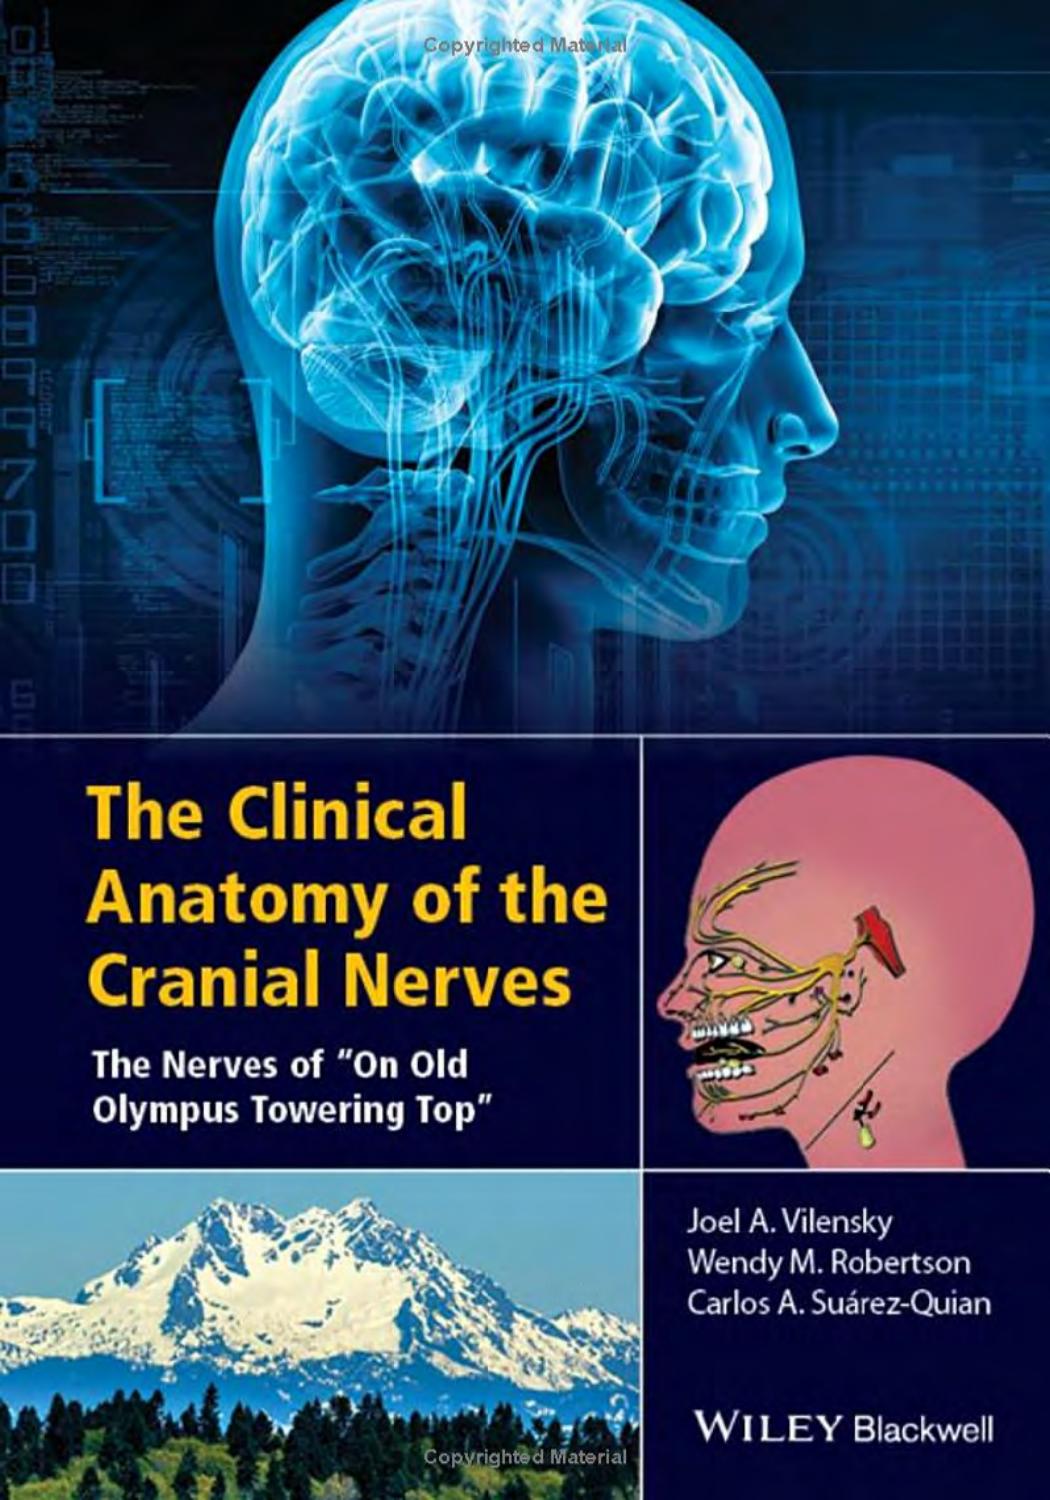 Clinical Anatomy of the Cranial Nerves The Nerves of On Old Olympus Towering Top, The.jpg